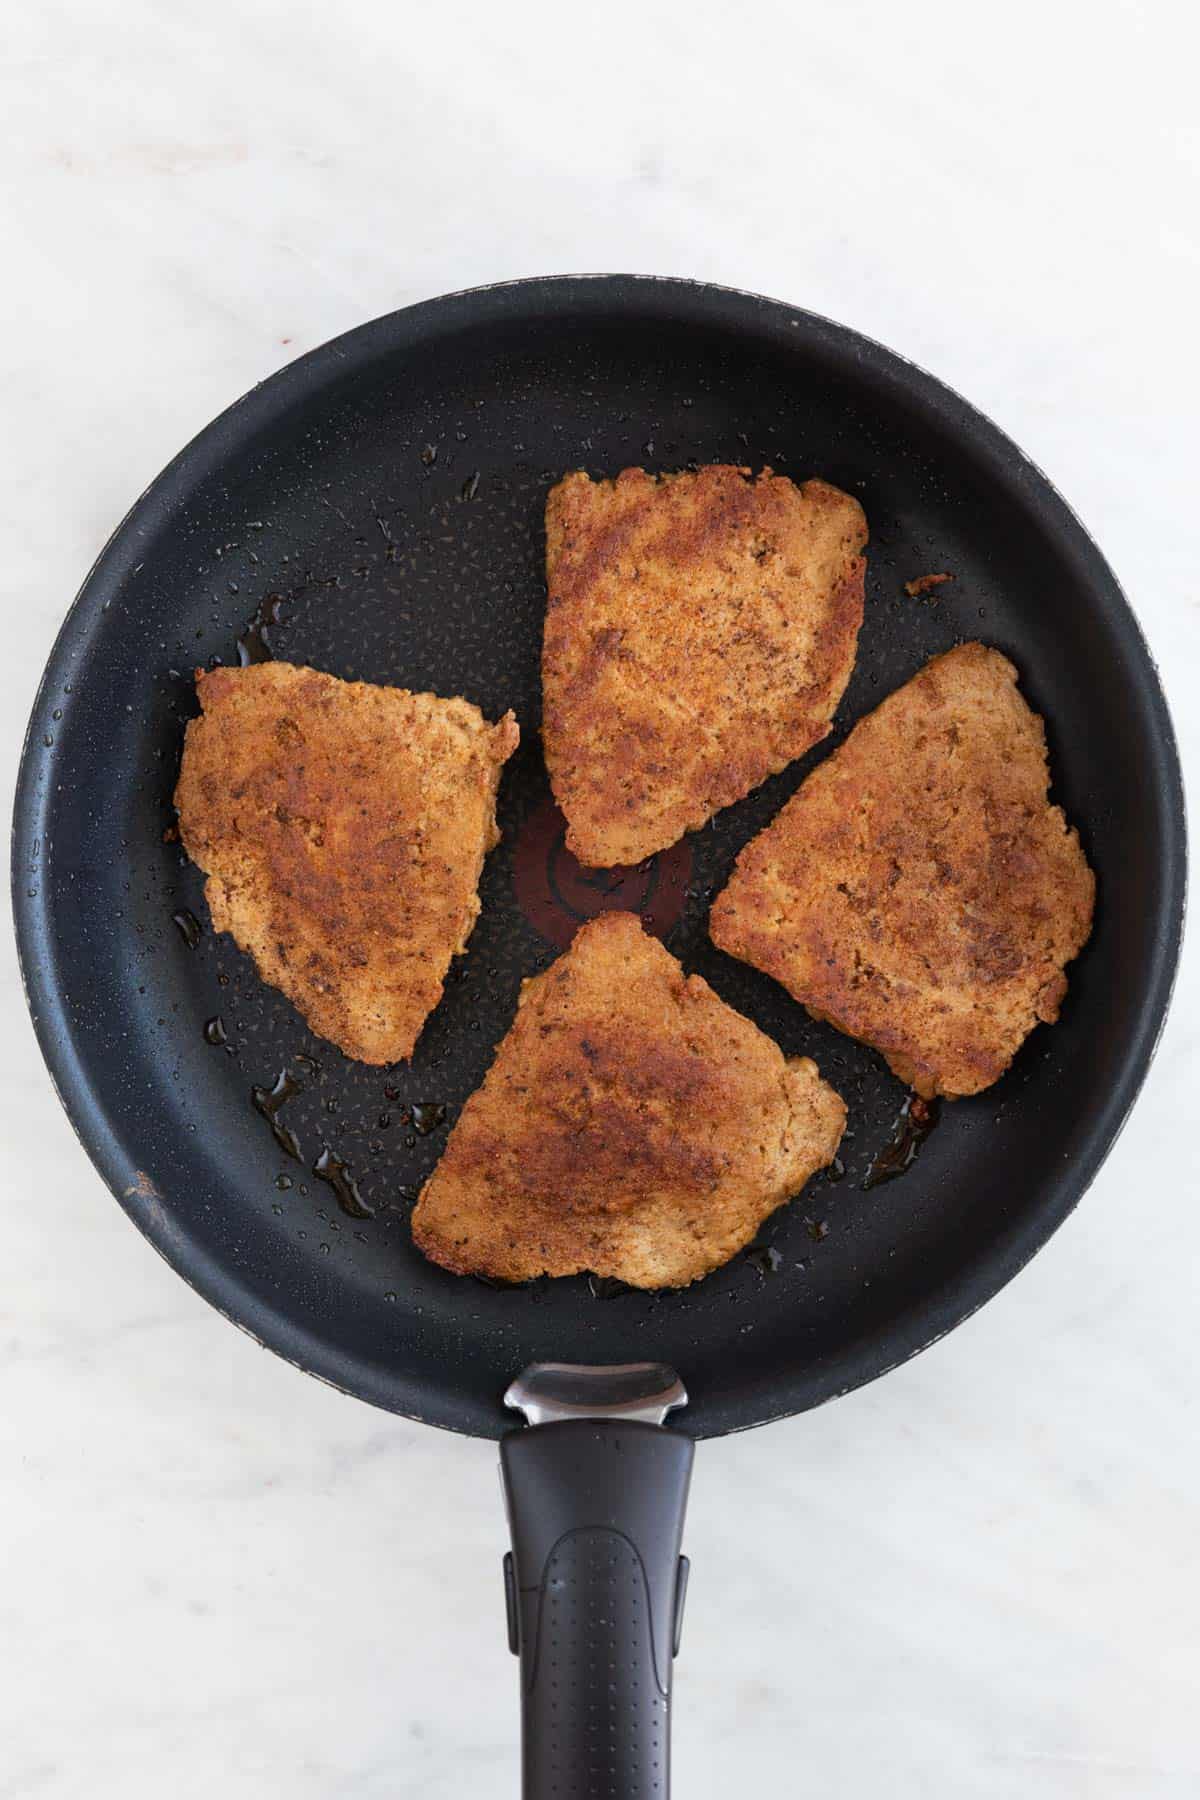 A skillet with 4 fully cooked vegan chicken fillets.